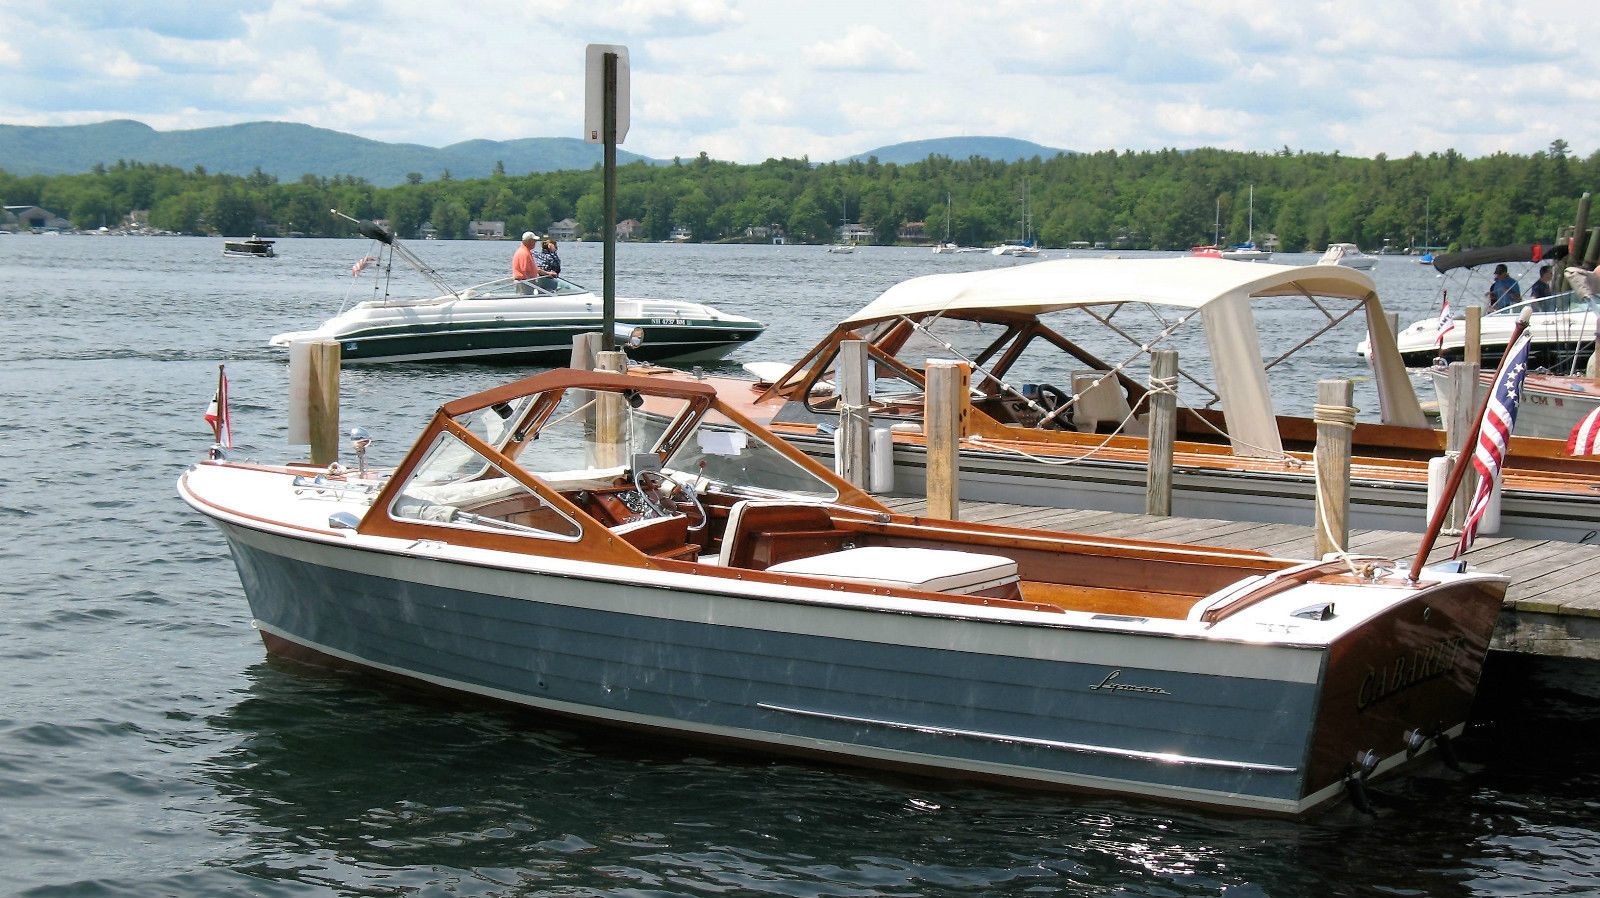 Lyman Runabout 1966 for sale for $17,900 - Boats-from-USA.com